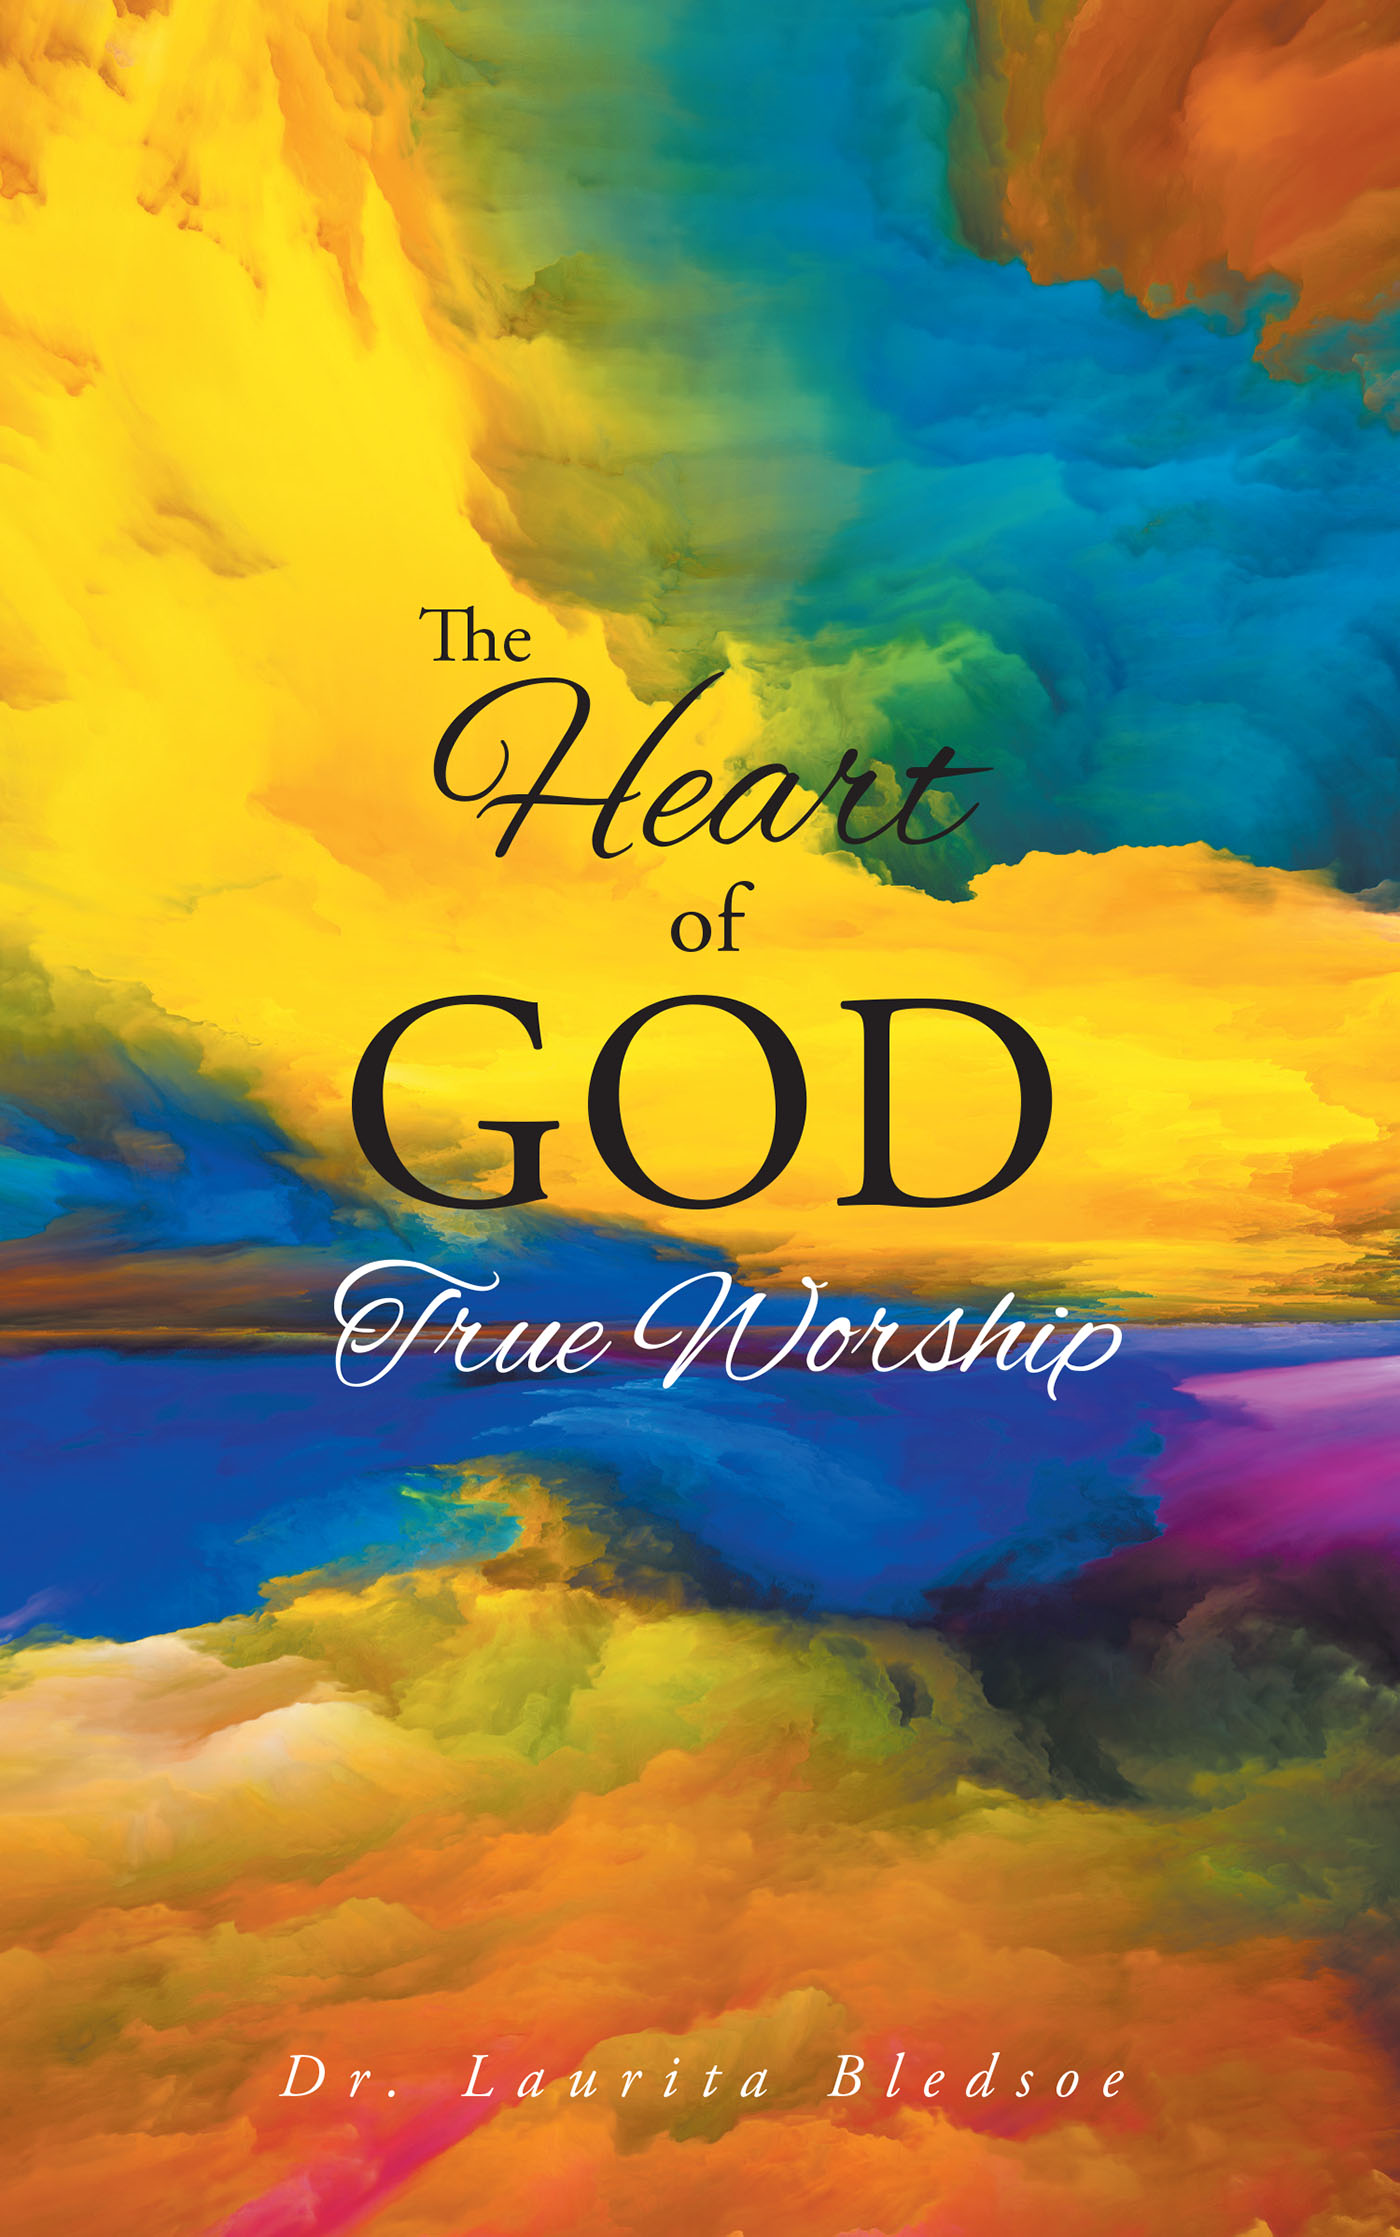 Dr. Laurita Bledsoe’s Newly Released "The Heart of God True Worship" is an Encouraging Examination of Purposeful Praise and Worship Practices